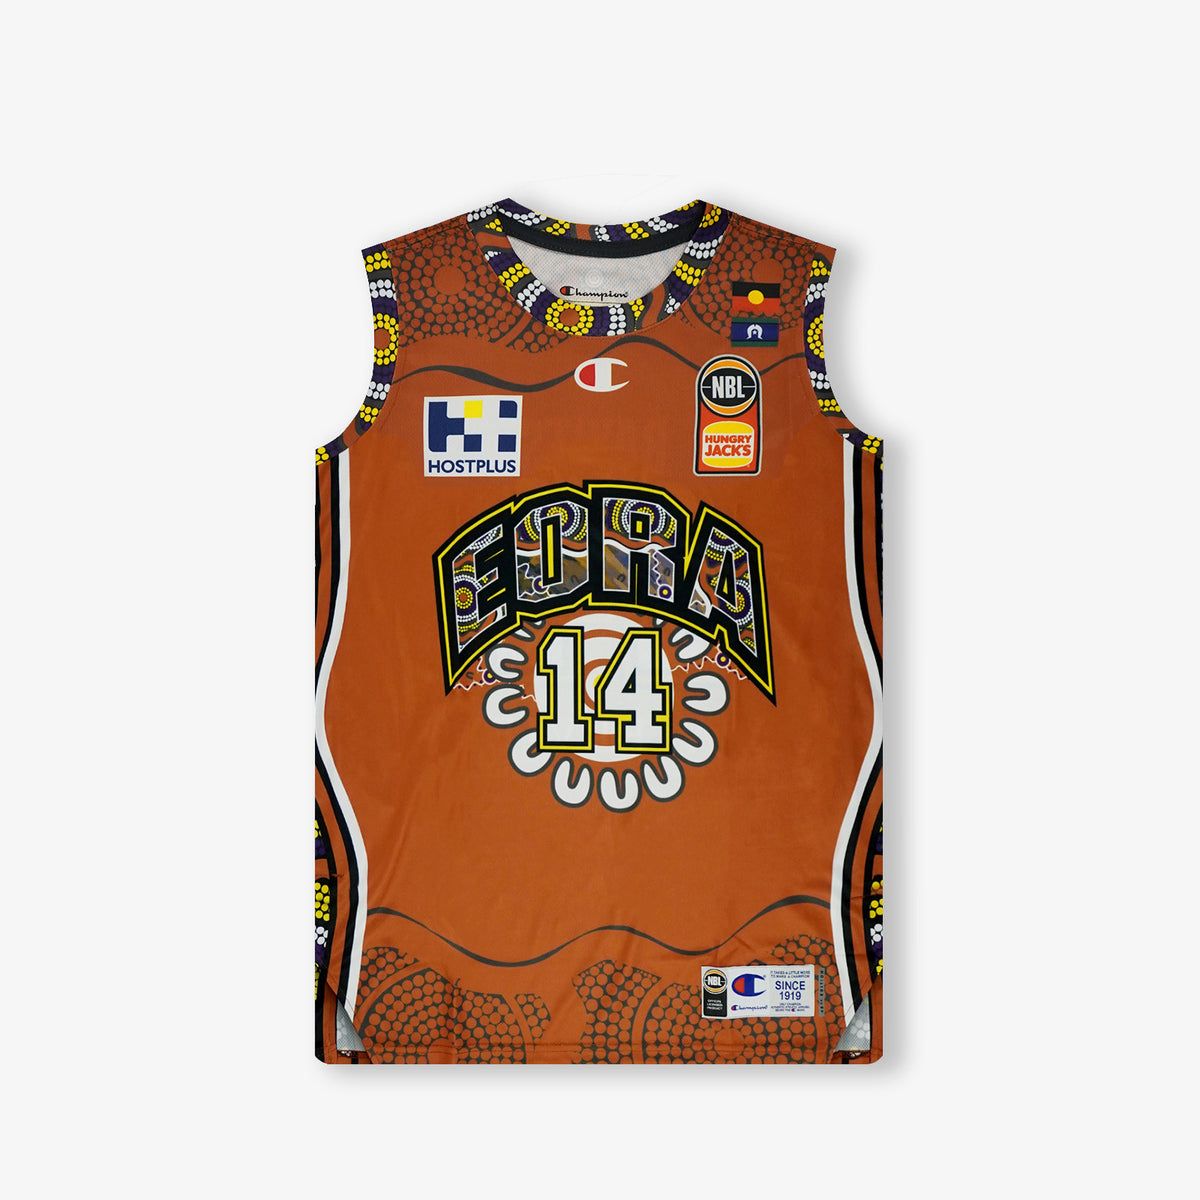 Biwali Bayles Sydney Kings NBL Indigenous Authentic Youth Jersey - Red